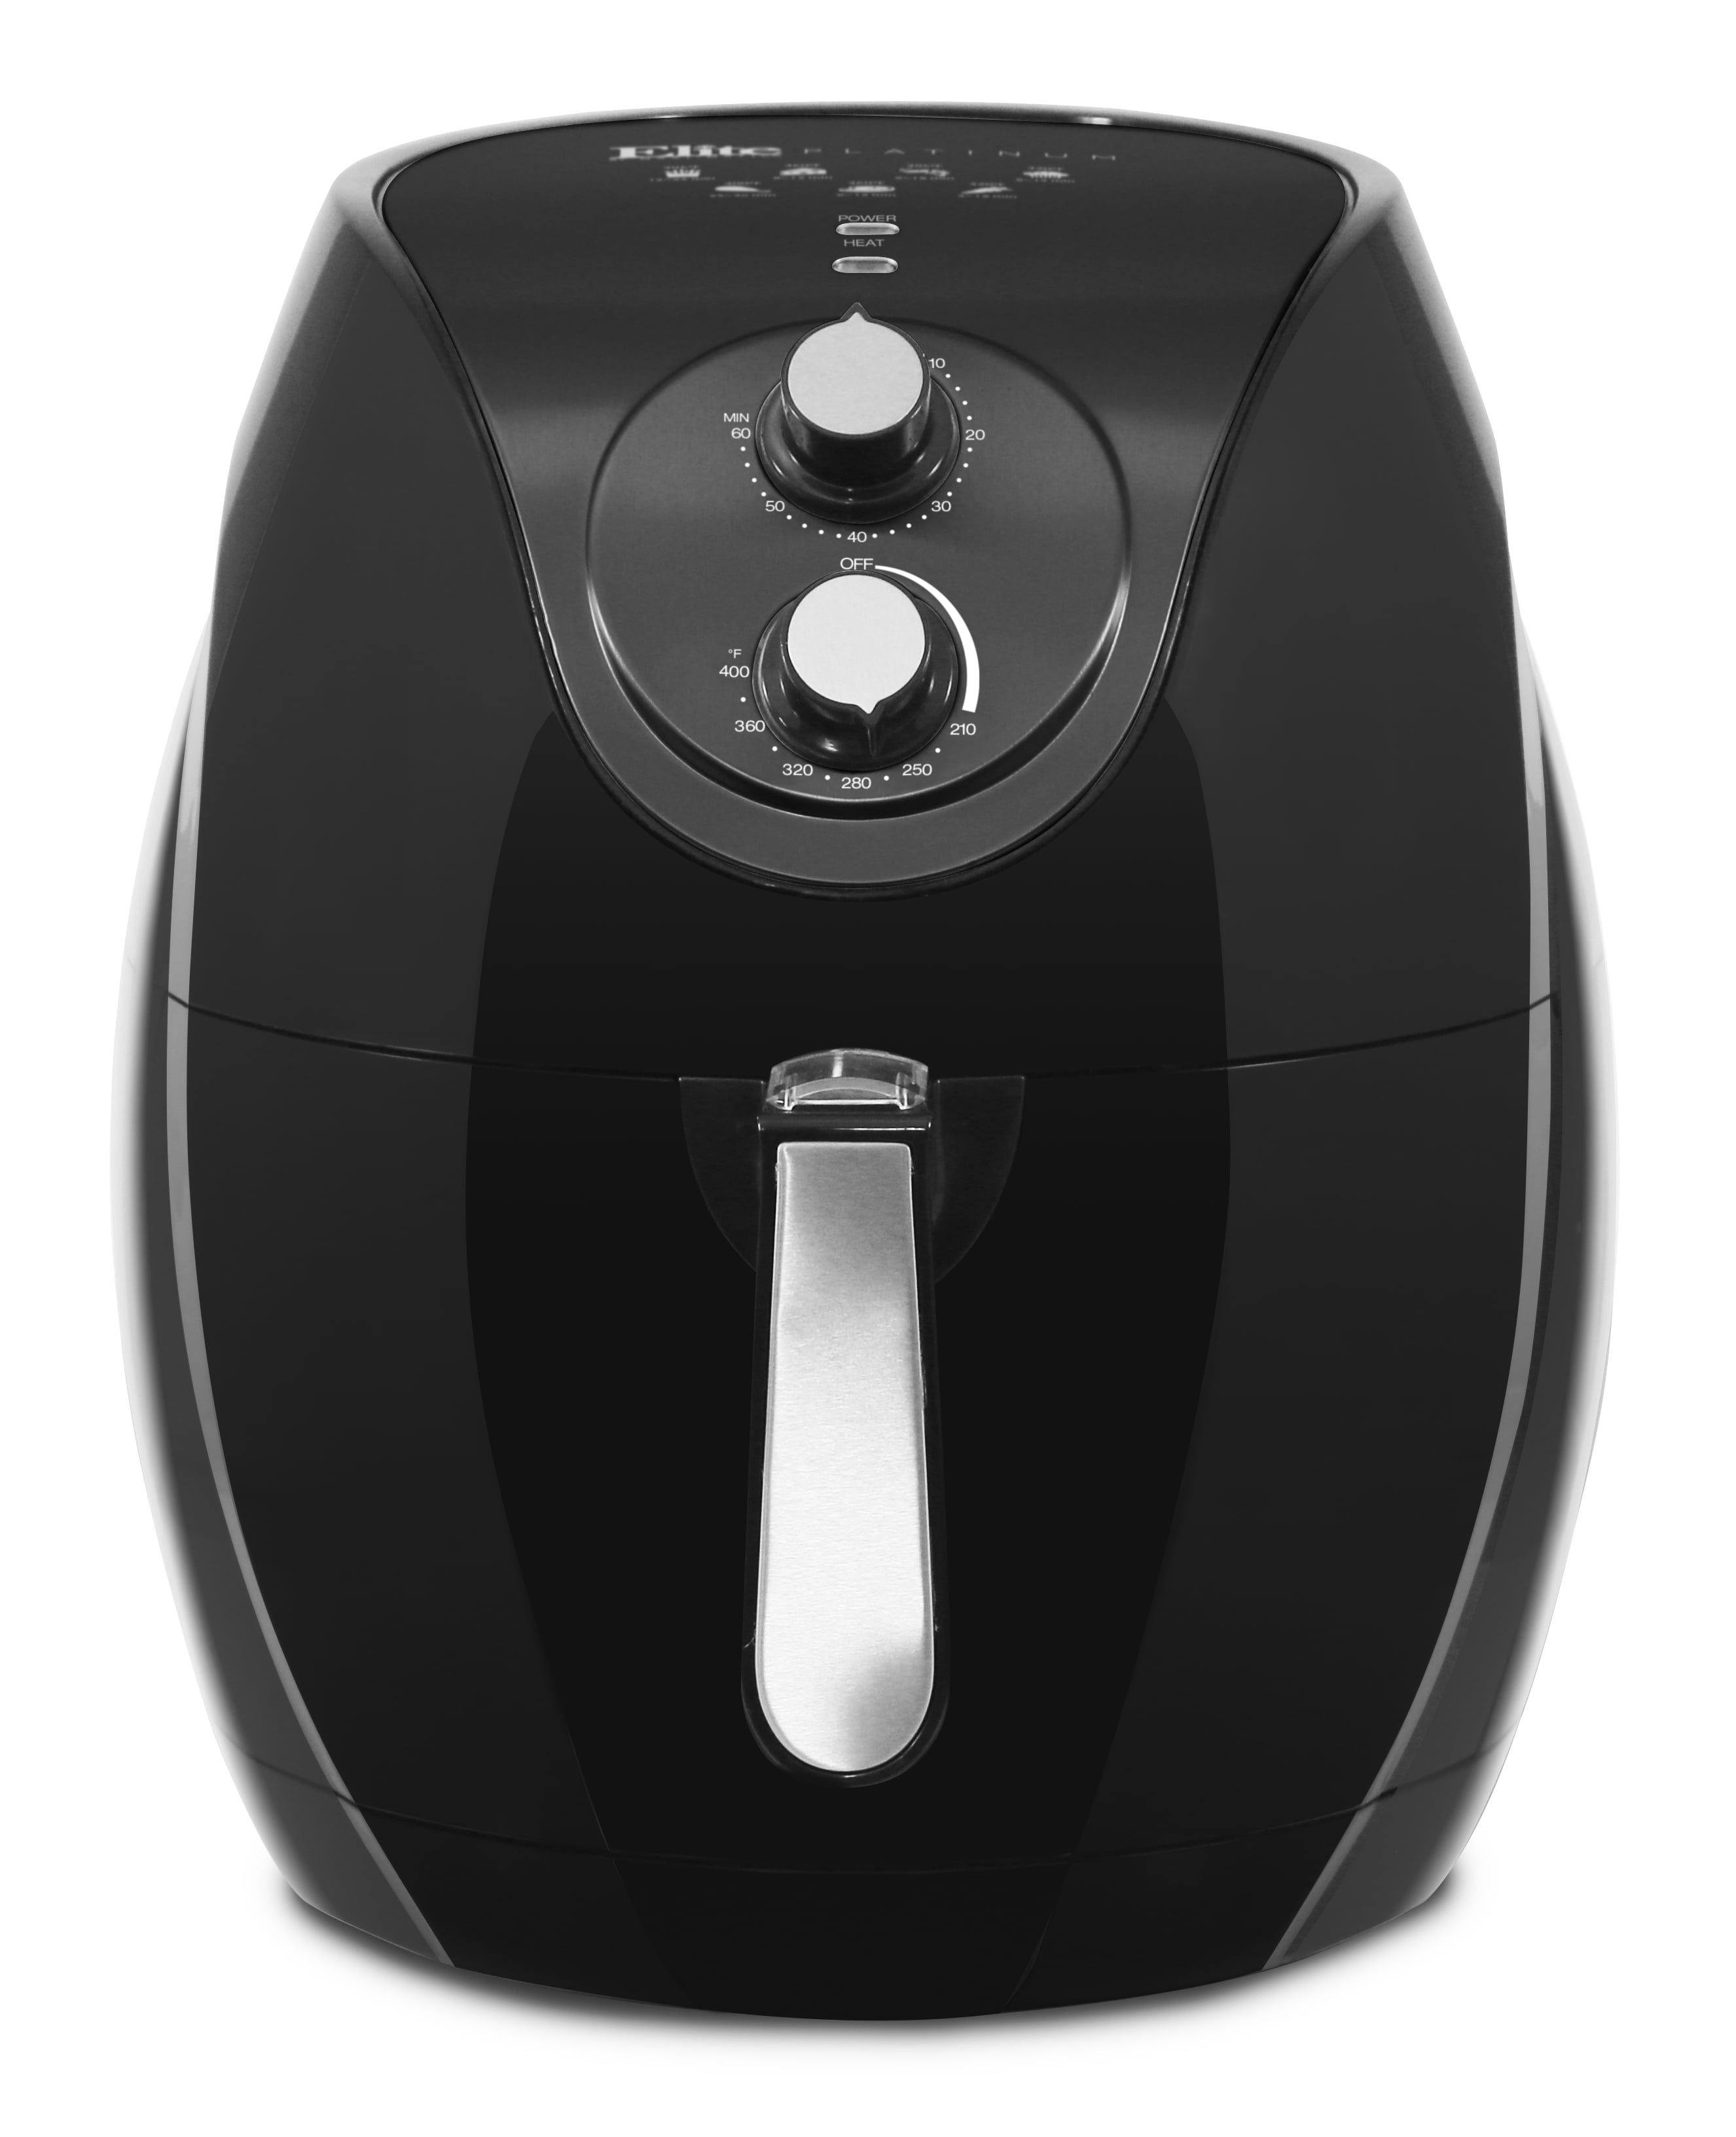 Ninja Af101 Air Fryer That Cooks Crisps and DEHYDRATES With 4 Quart Capacity for sale online 